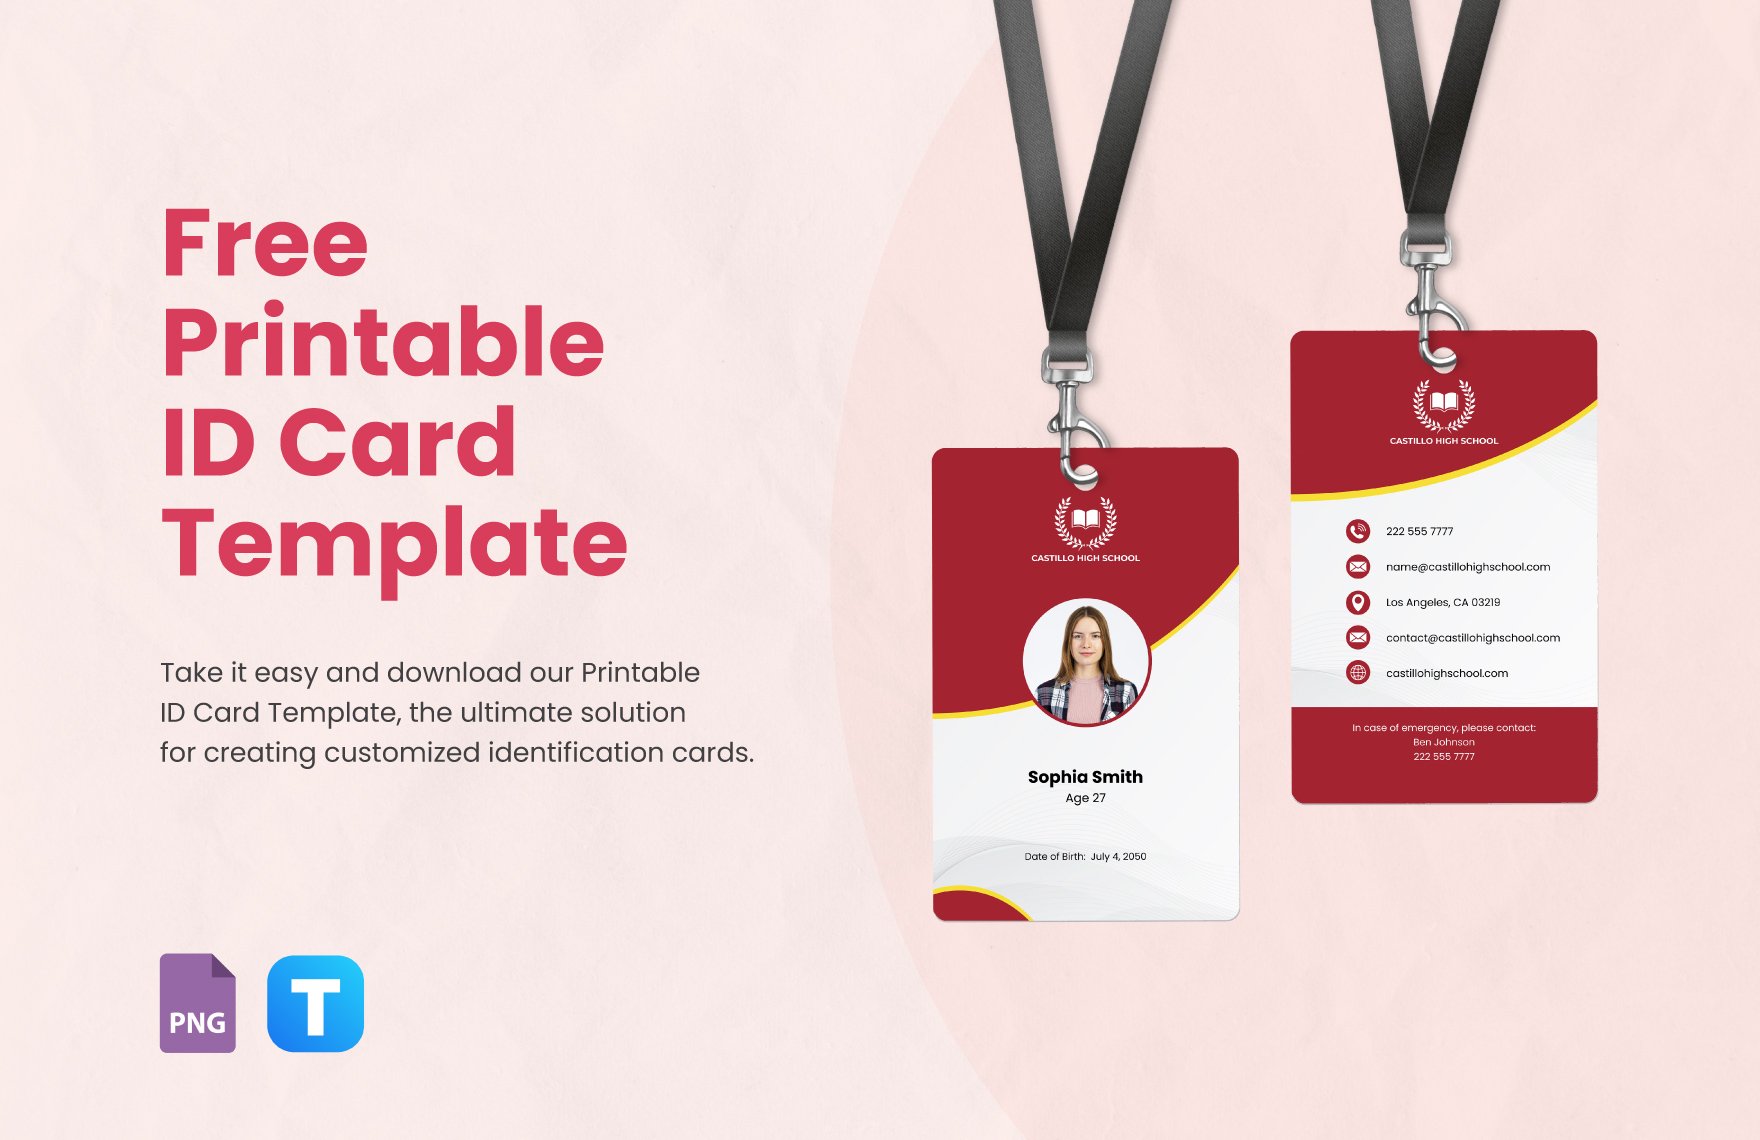 Free Printable ID Card Template in PNG